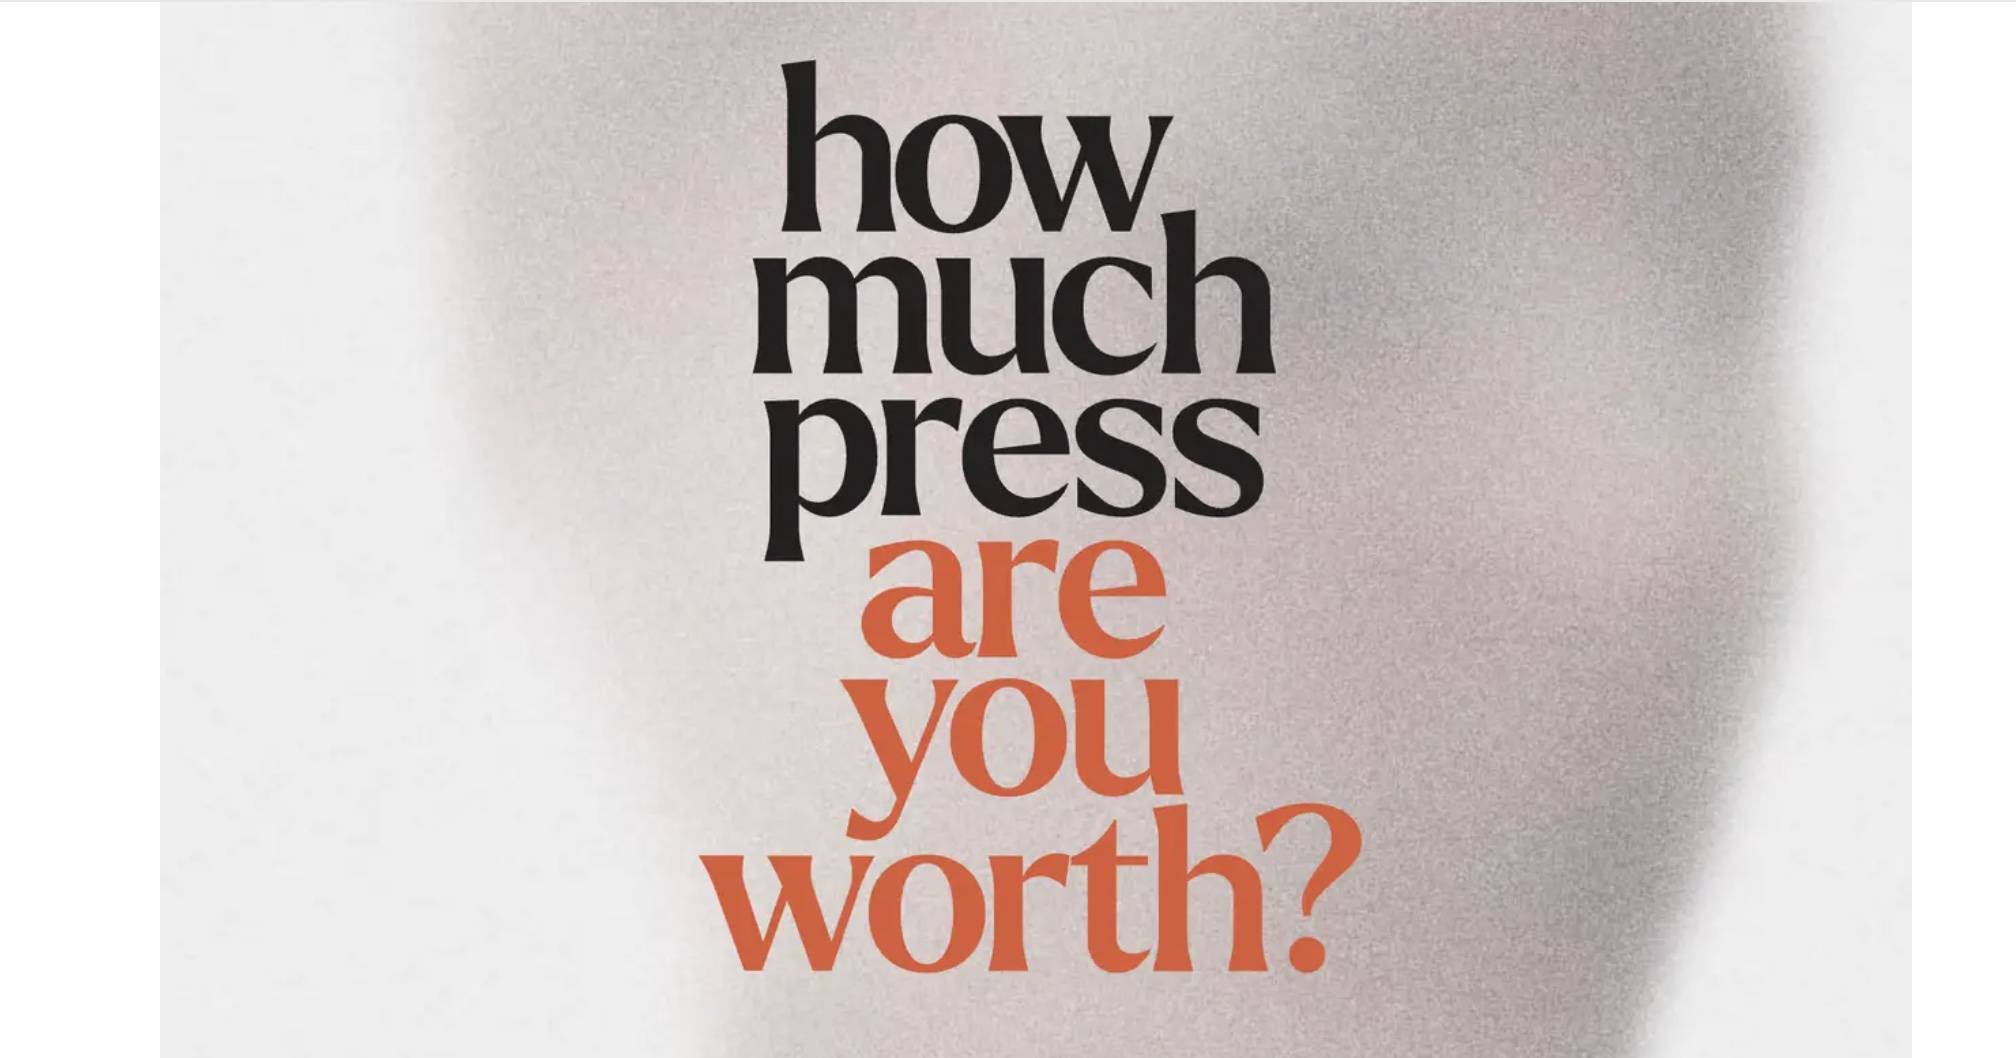 Copy that reads "how much press are you worth?"